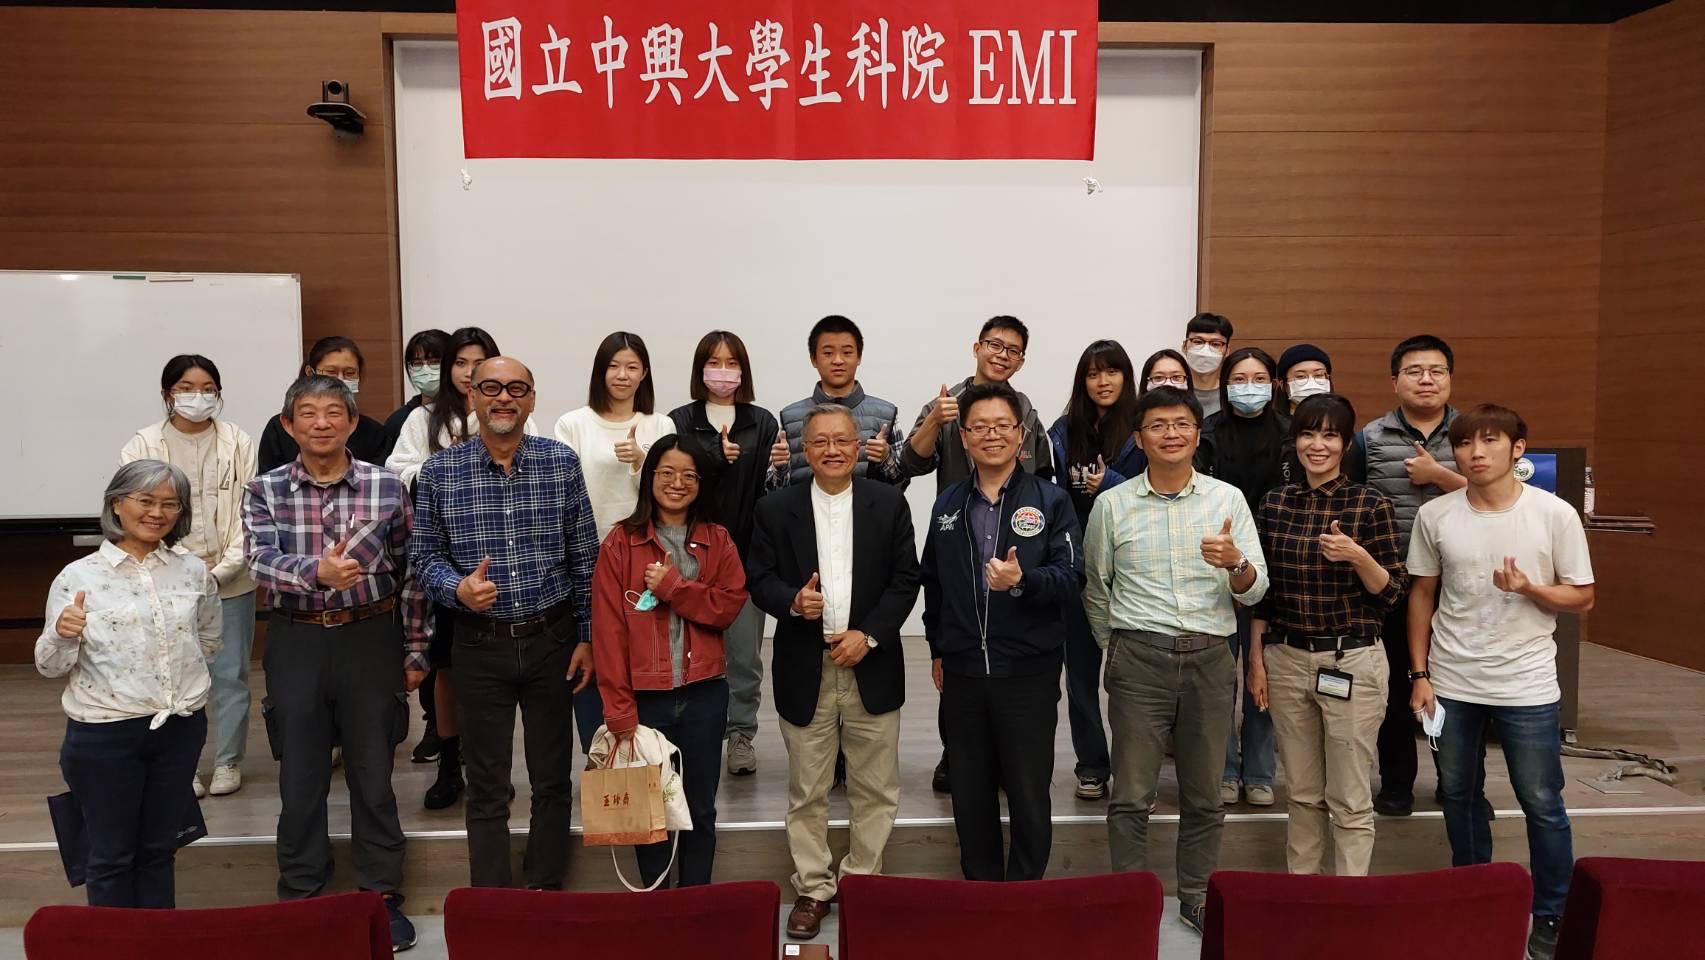 EMI WORKSHOP - The Experiences of a Taiwanese who was a faculty in American Universities